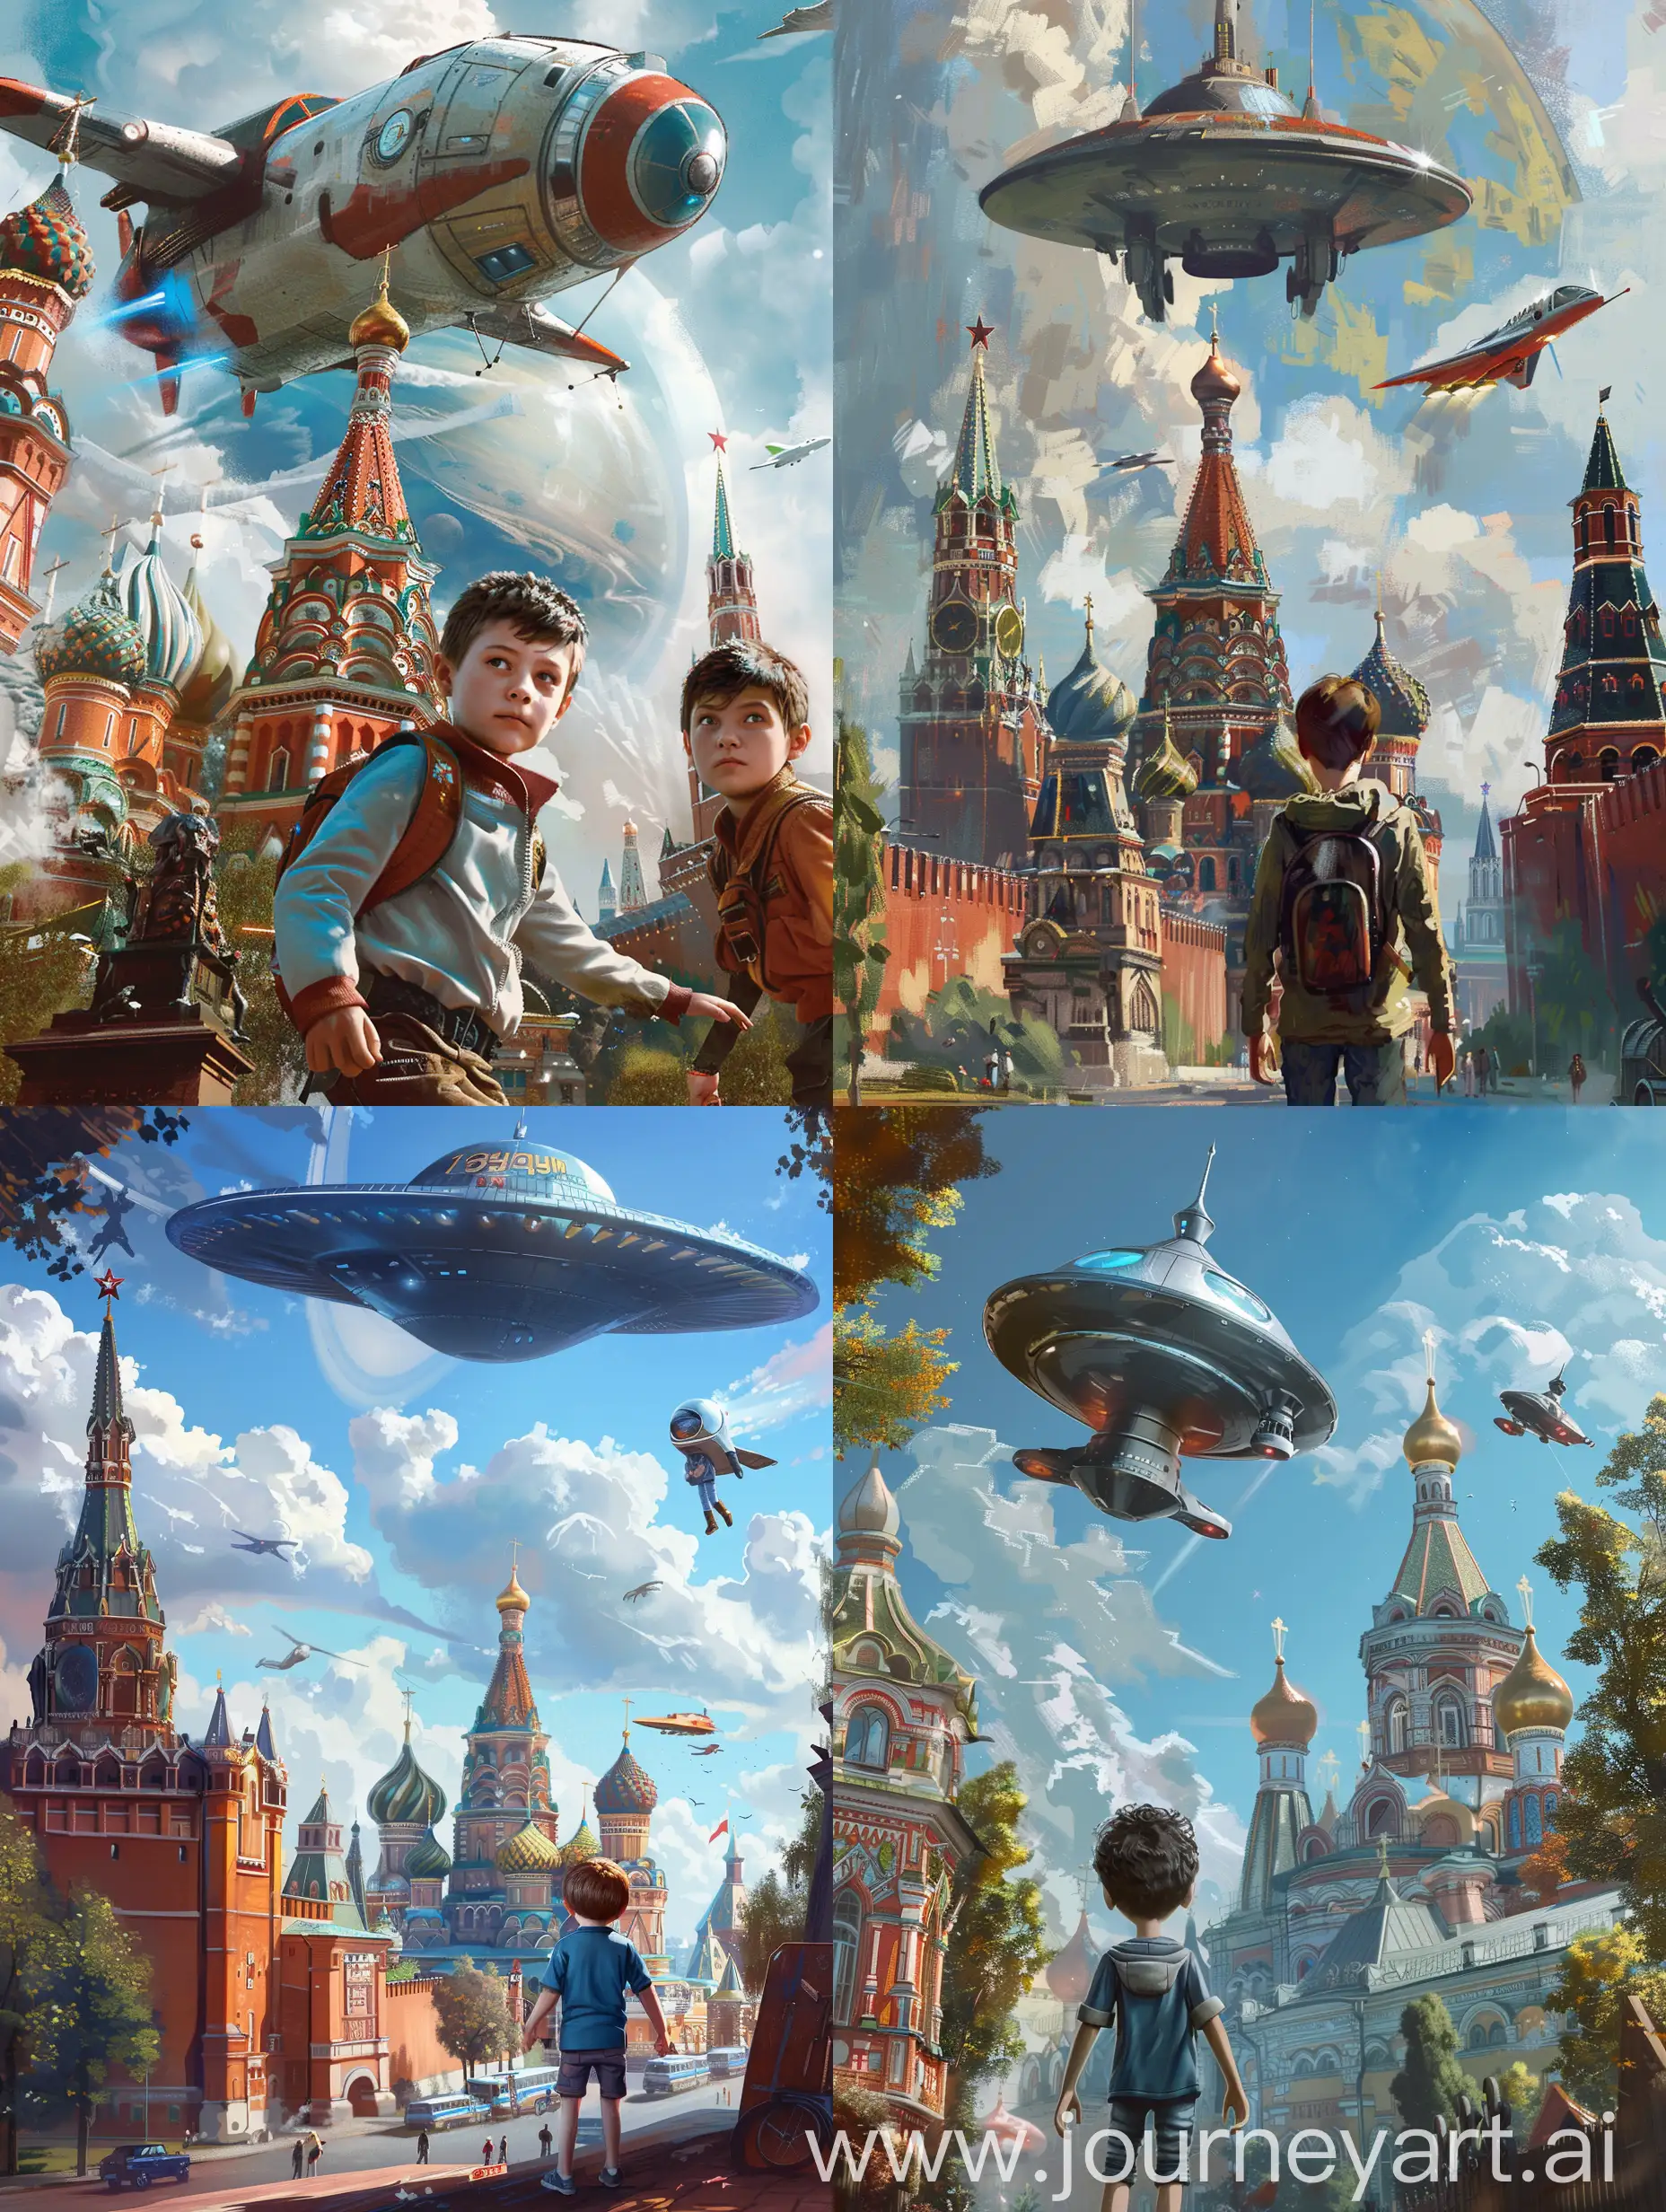 A boy named Vladik has been waiting for 13 years to return to his home planet Angeline while on Earth. His best friend flies to him on a spaceship and stays with him. They go to school in Moscow together.